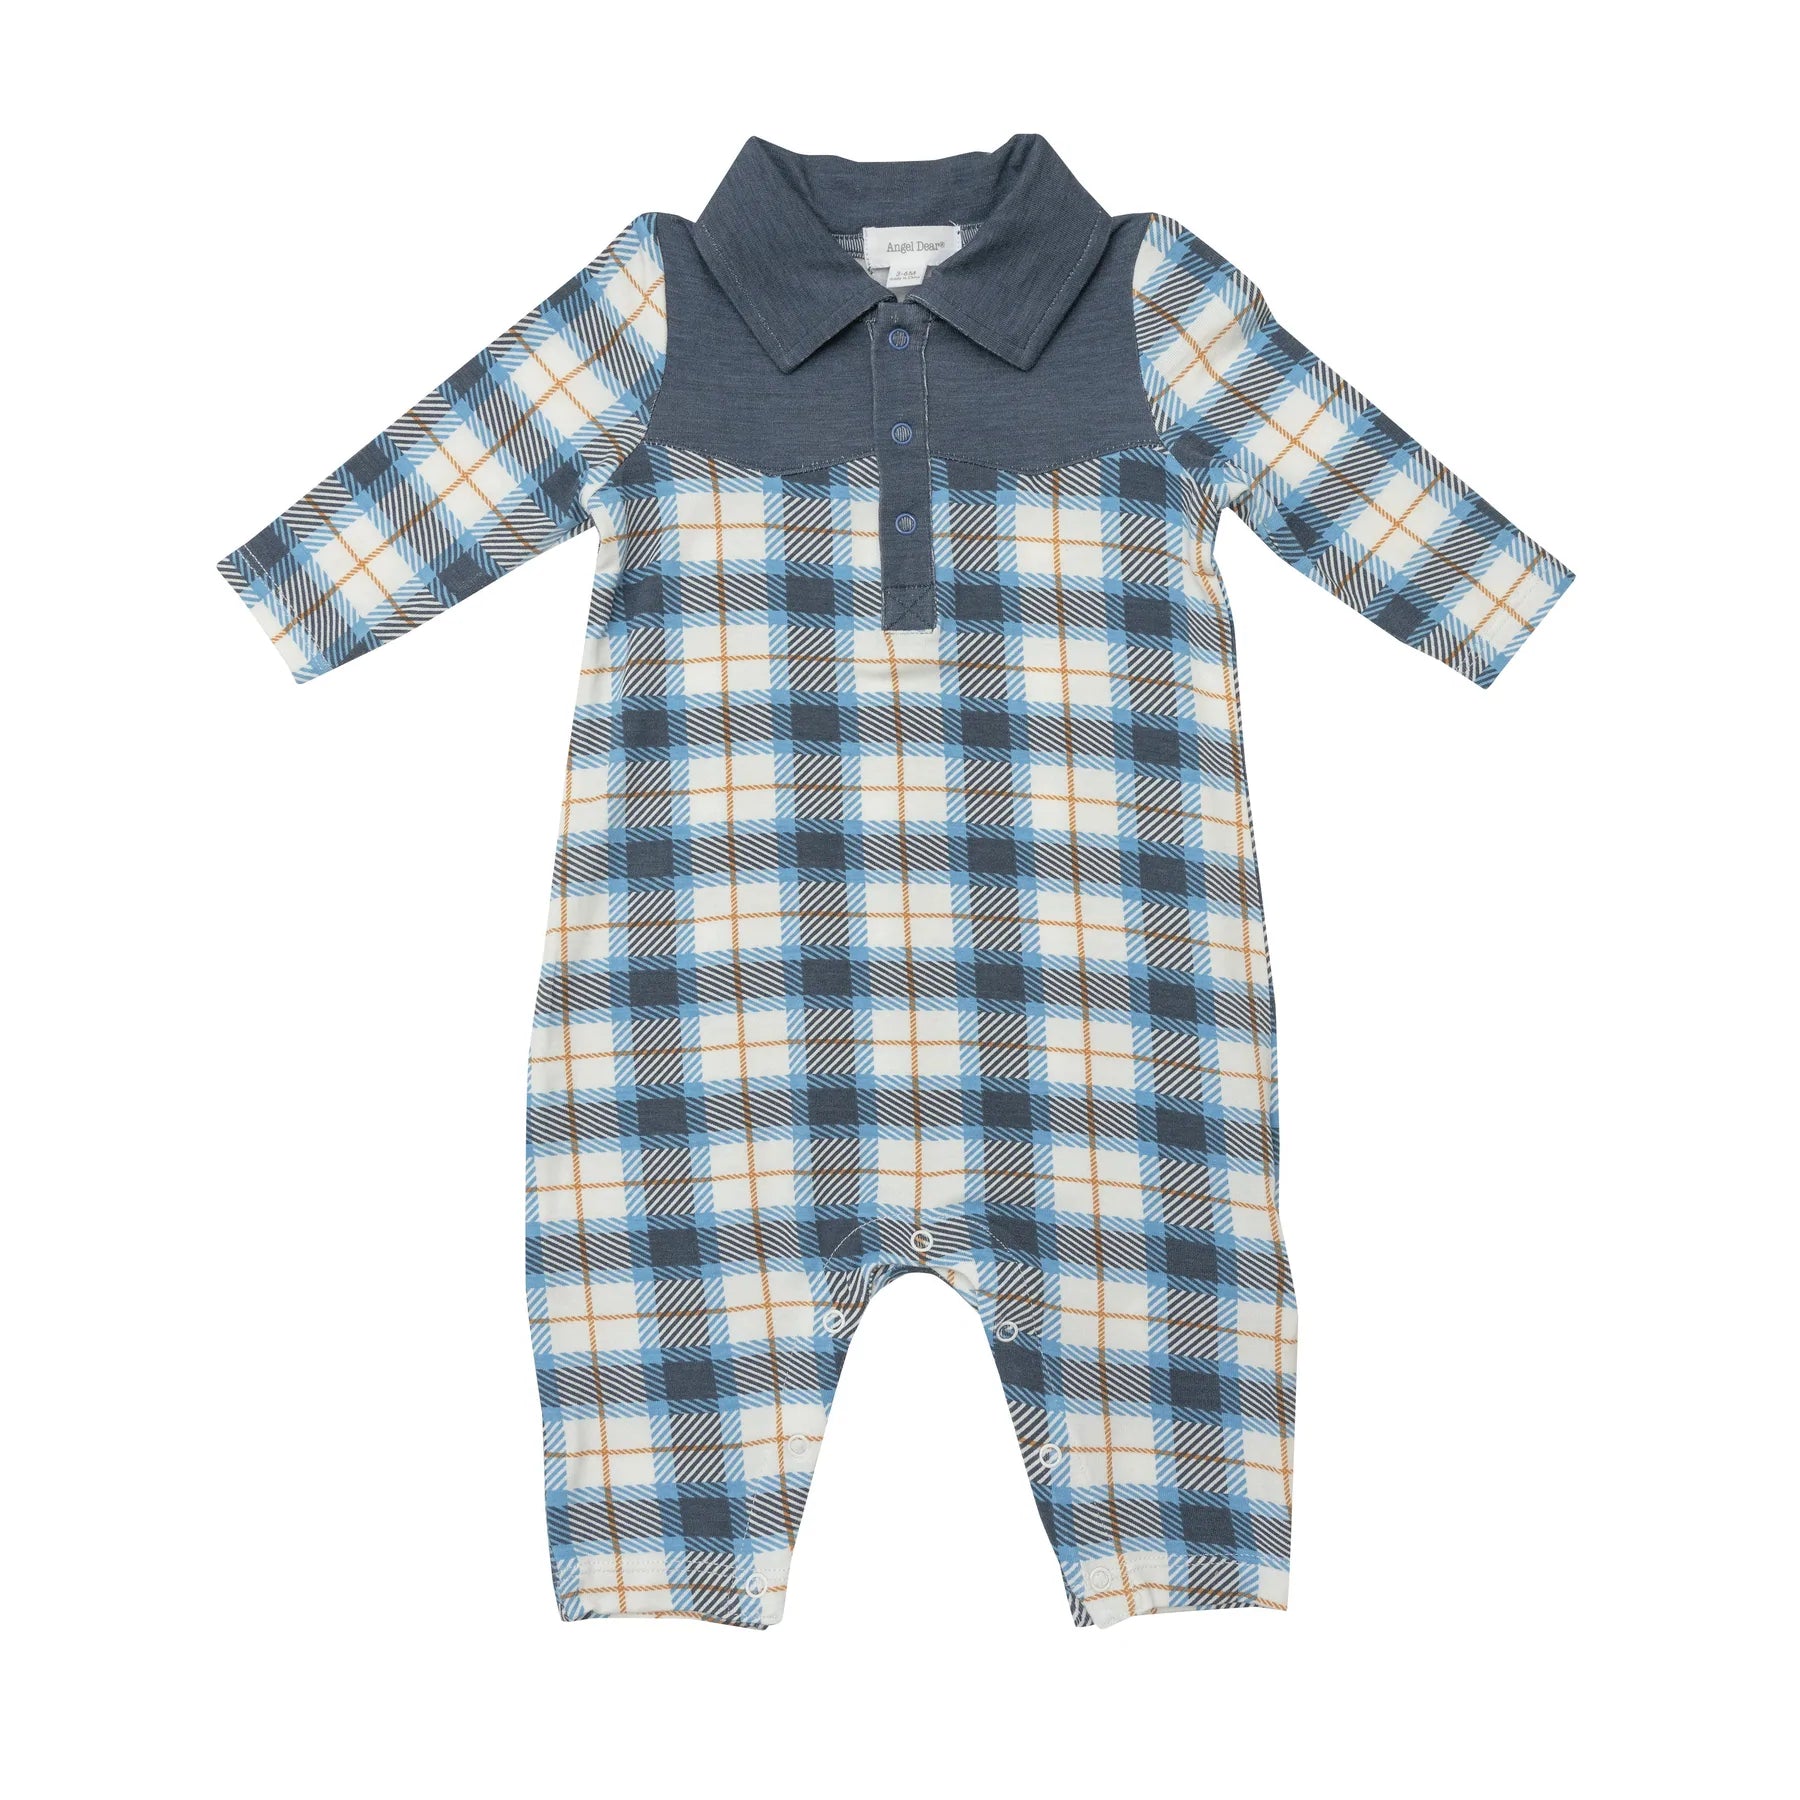 Cowboy Romper in Fall Flannel Plaid  - Doodlebug's Children's Boutique